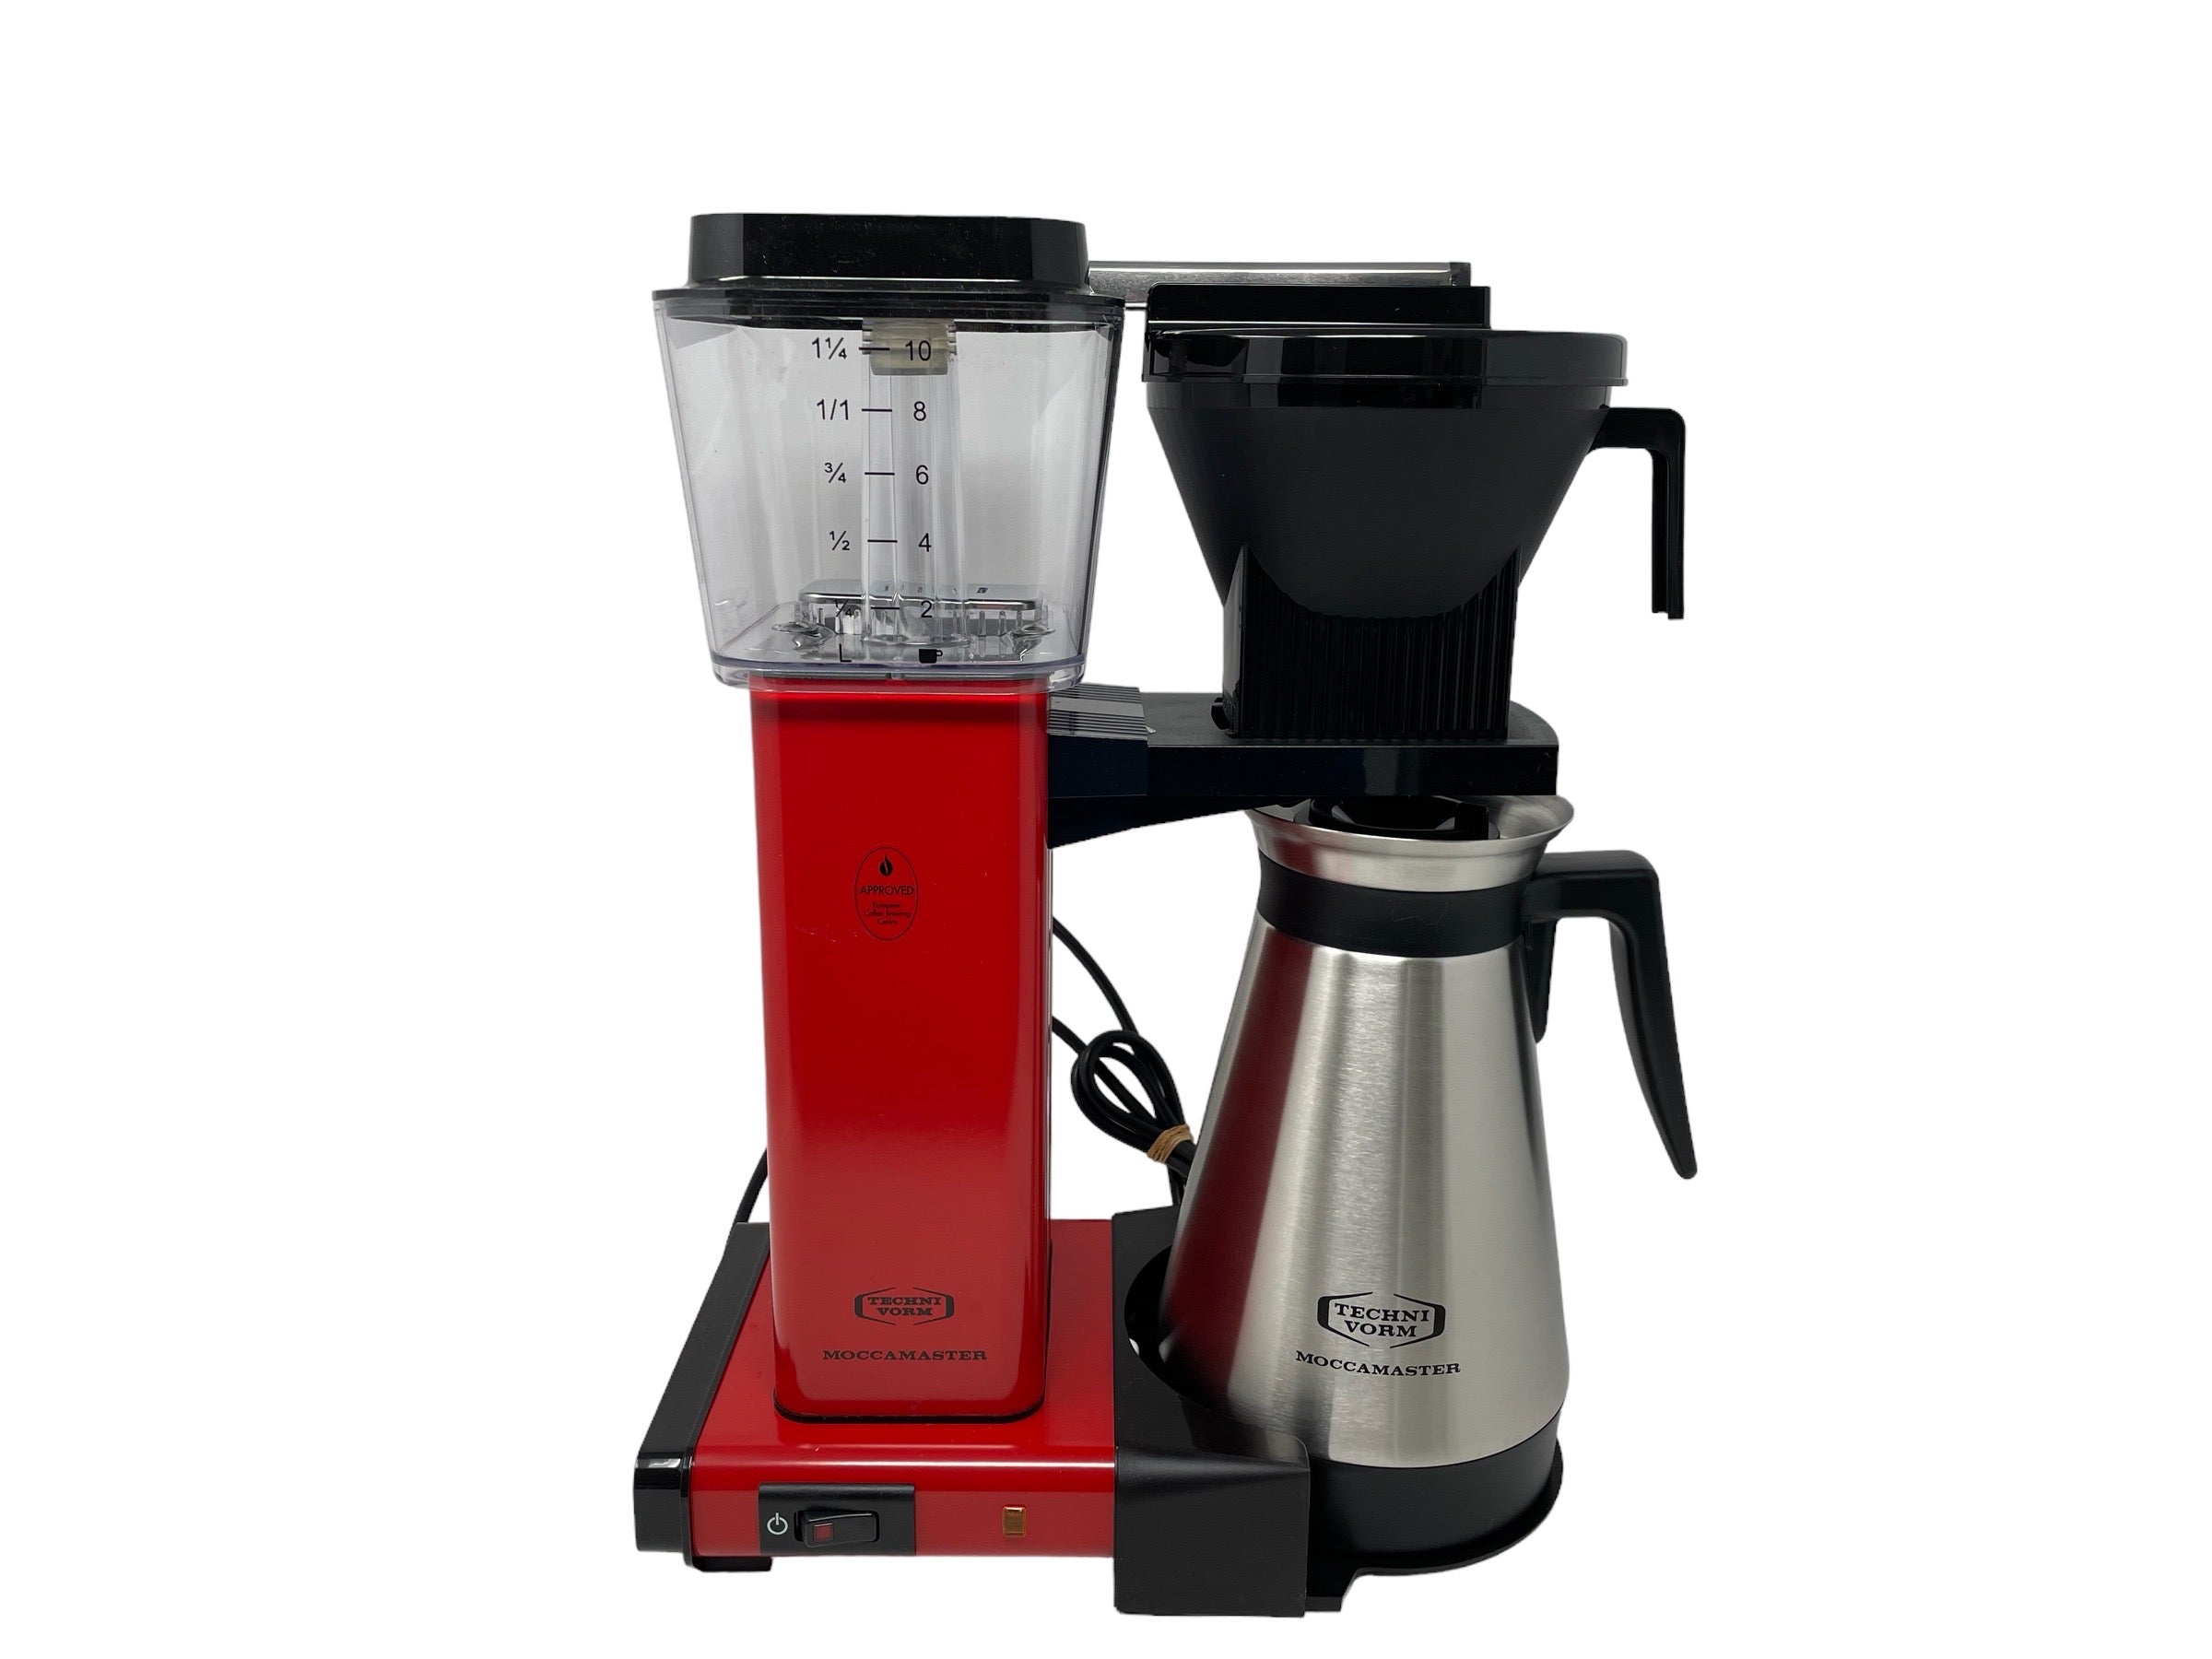 (B1) Tchibo Moccamaster KBGT Thermos, coffee maker thermos, filter coffee maker, red, 1.25 liters